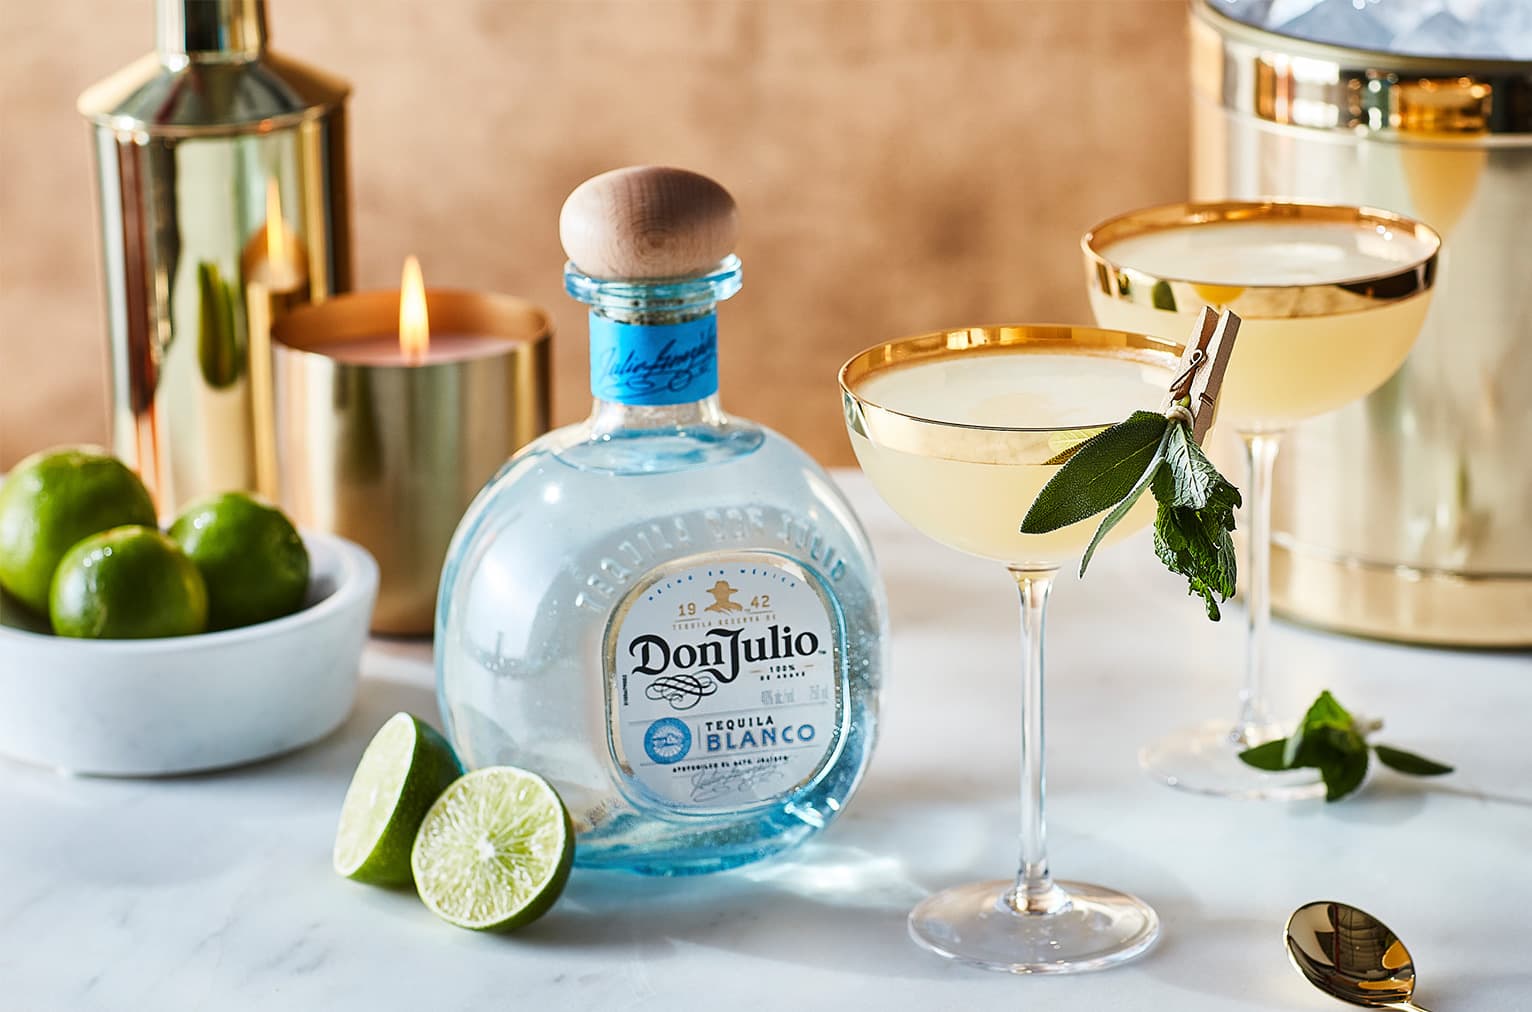 Showtime Margarita made with Don Julio Blanco Tequila